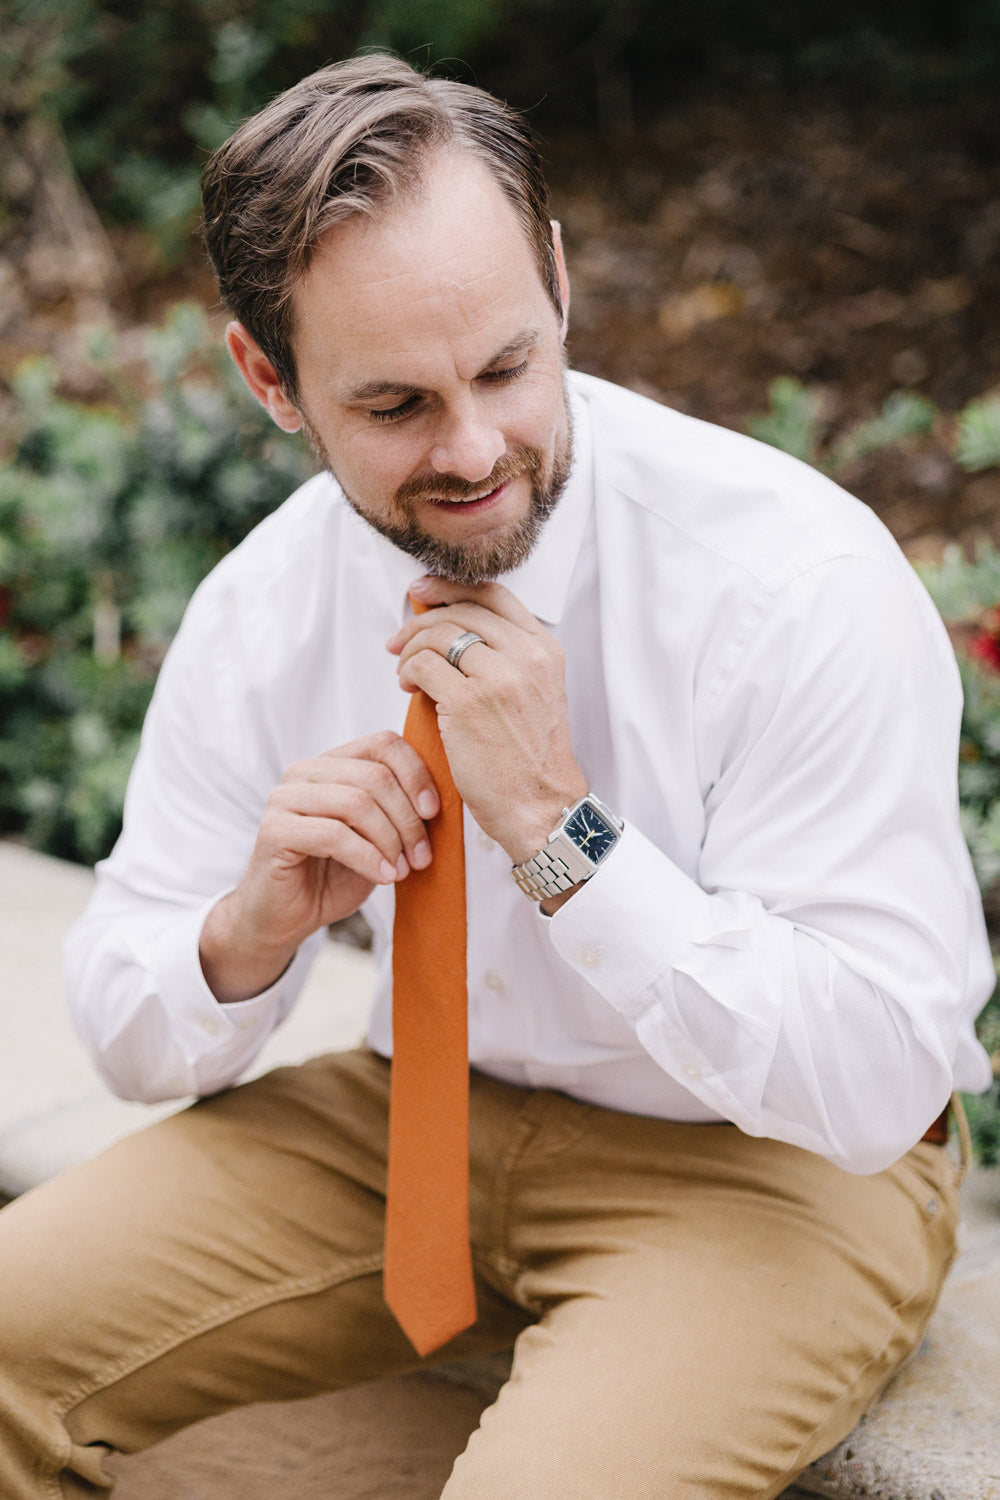 Pumpkin tie worn with a white shirt and tan pants.